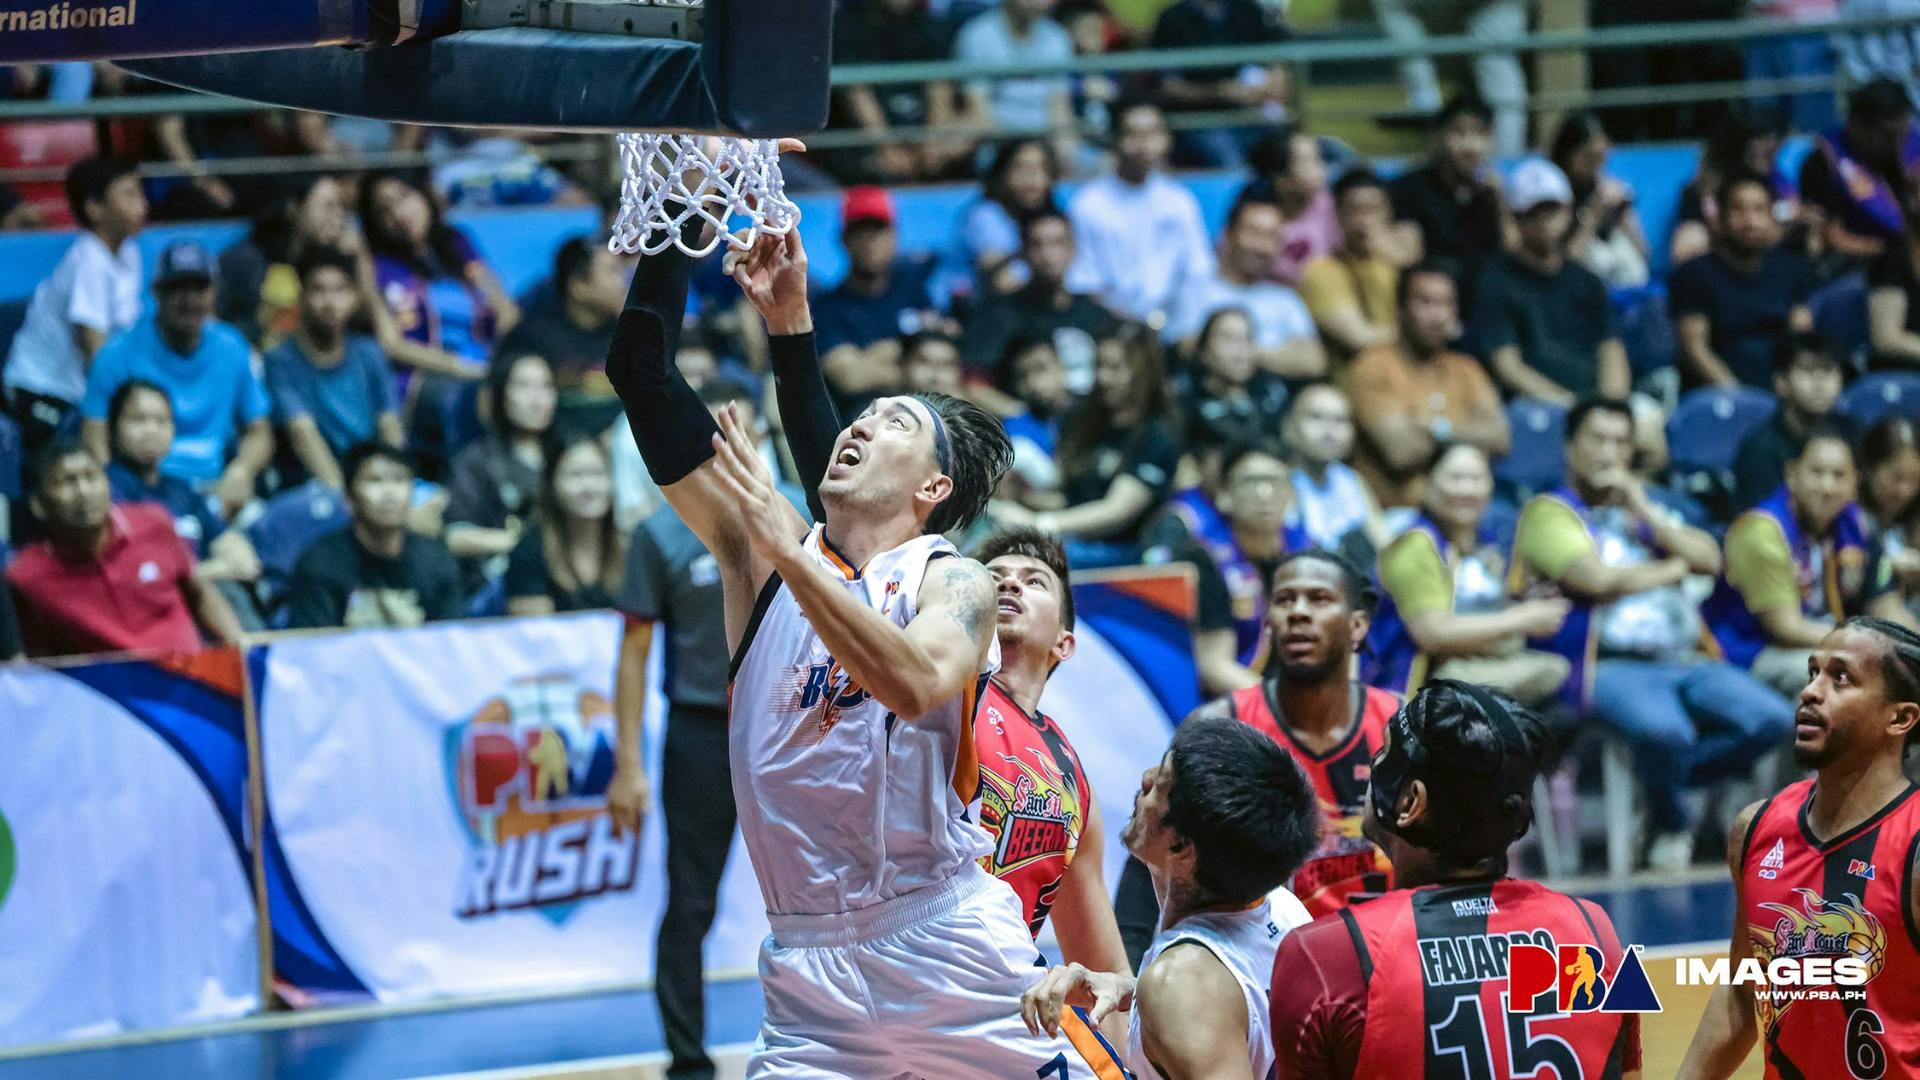 PBA: Cliff Hodge is Player of the Week after helping Meralco zap no. 1 San Miguel